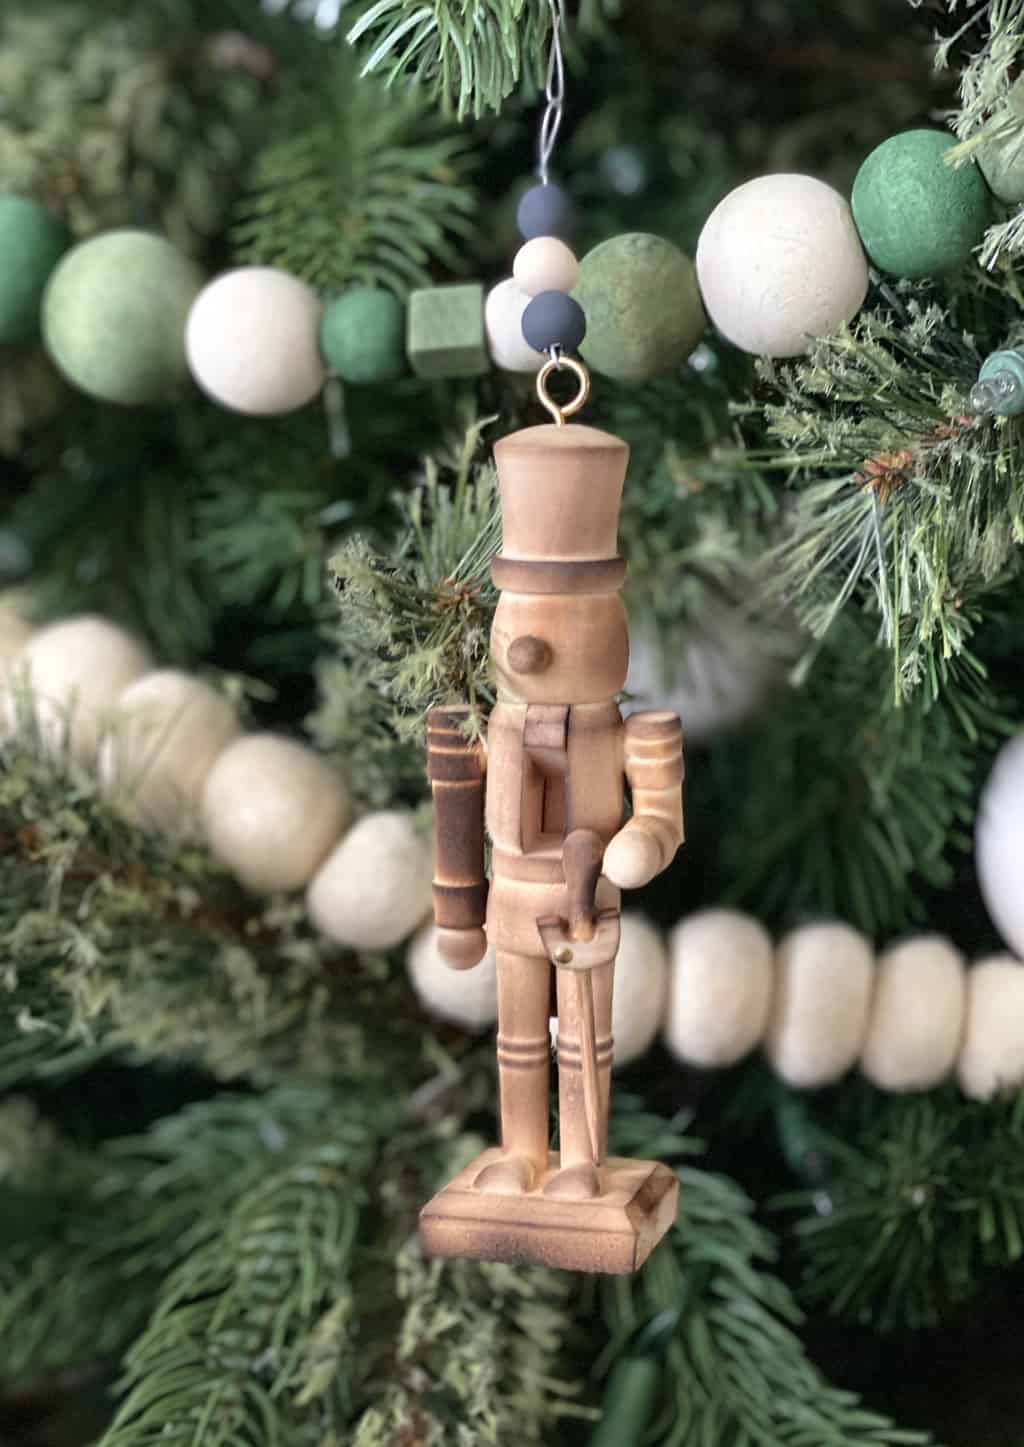 Looking for a cute homemade ornament idea? These DIY Nutcracker Christmas ornaments are easy to make and so cute hanging on the tree.